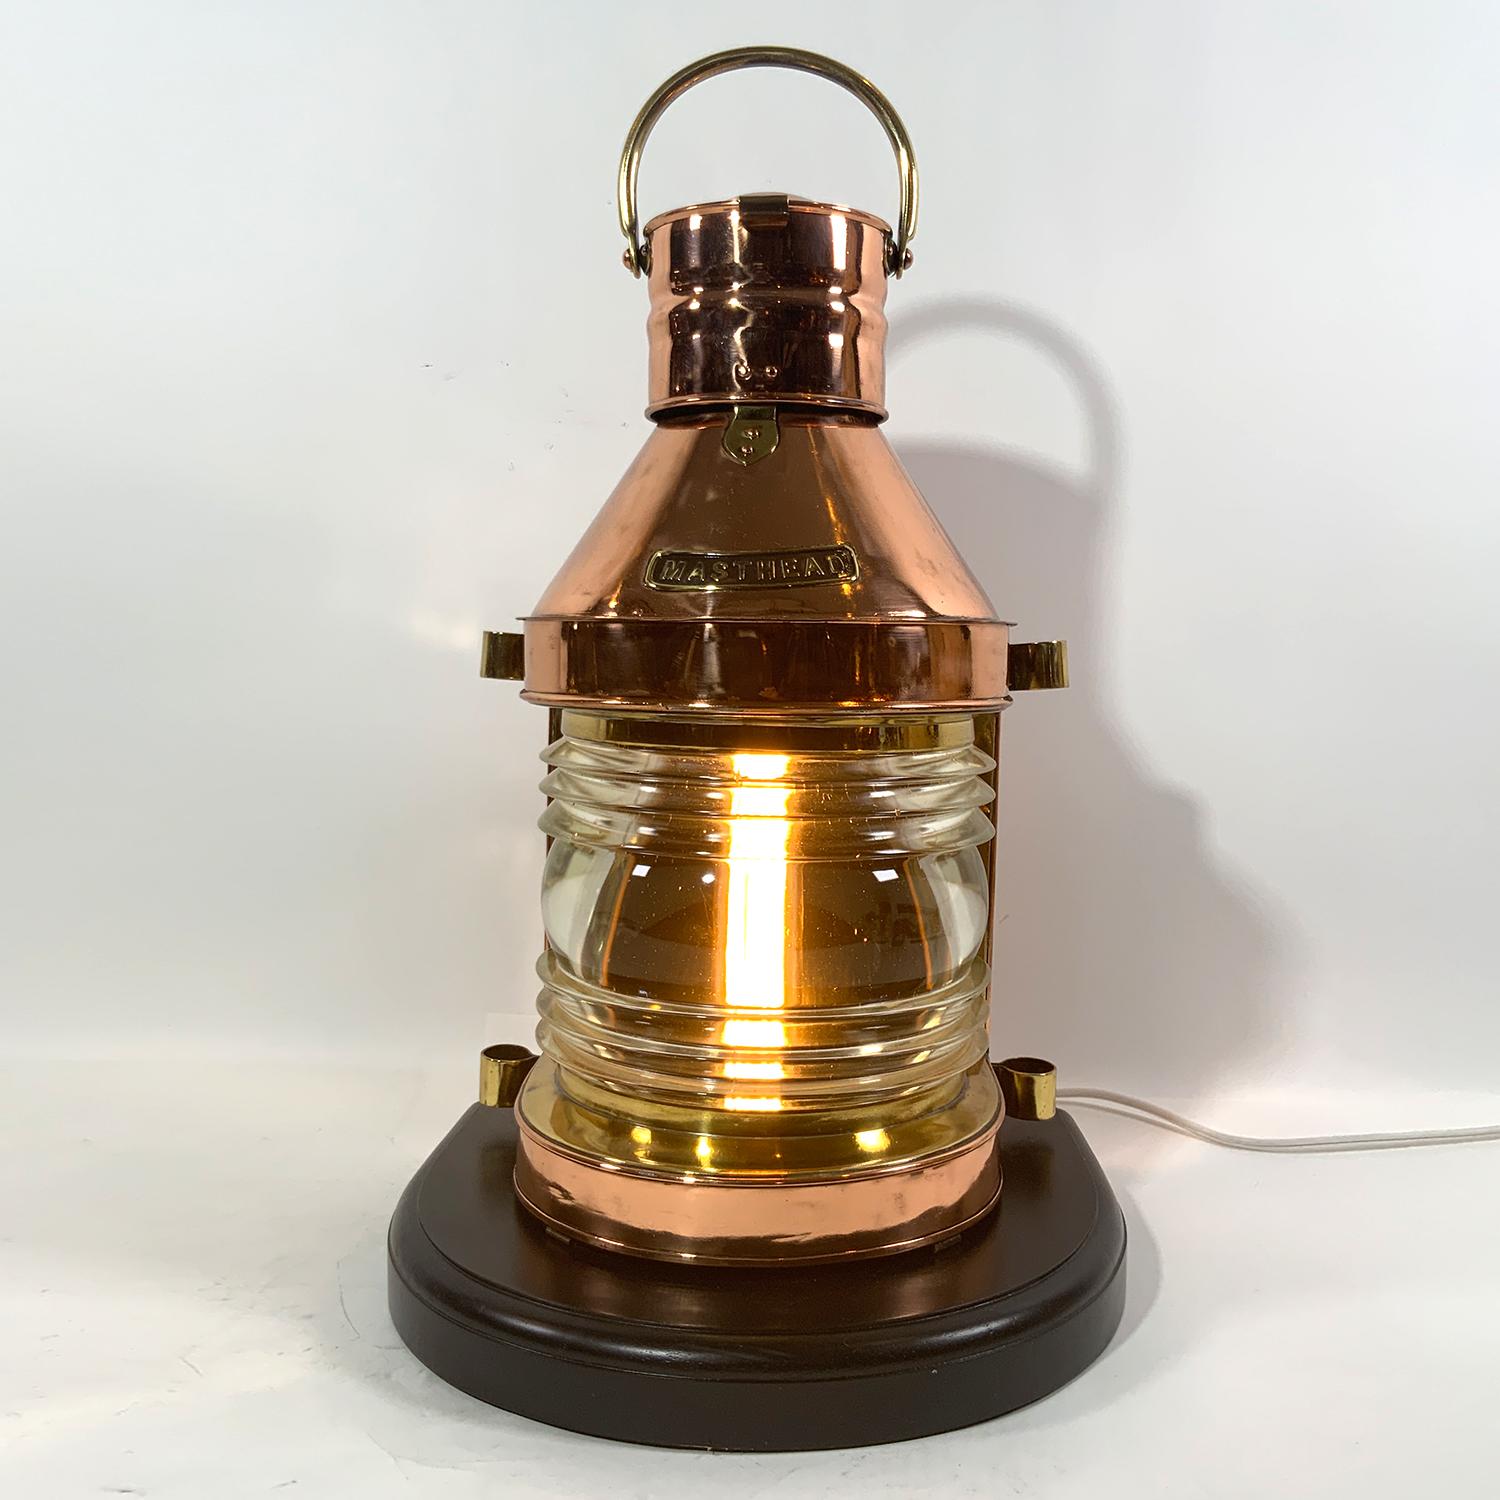 Highly polish and lacquered ship's masthead lantern. With clear Fresnel glass lens. Vented top, brass carry handle. Mounted to a thick mahogany base. Wired for home use. This is an exceptional lantern in very good condition. Circa 1925.